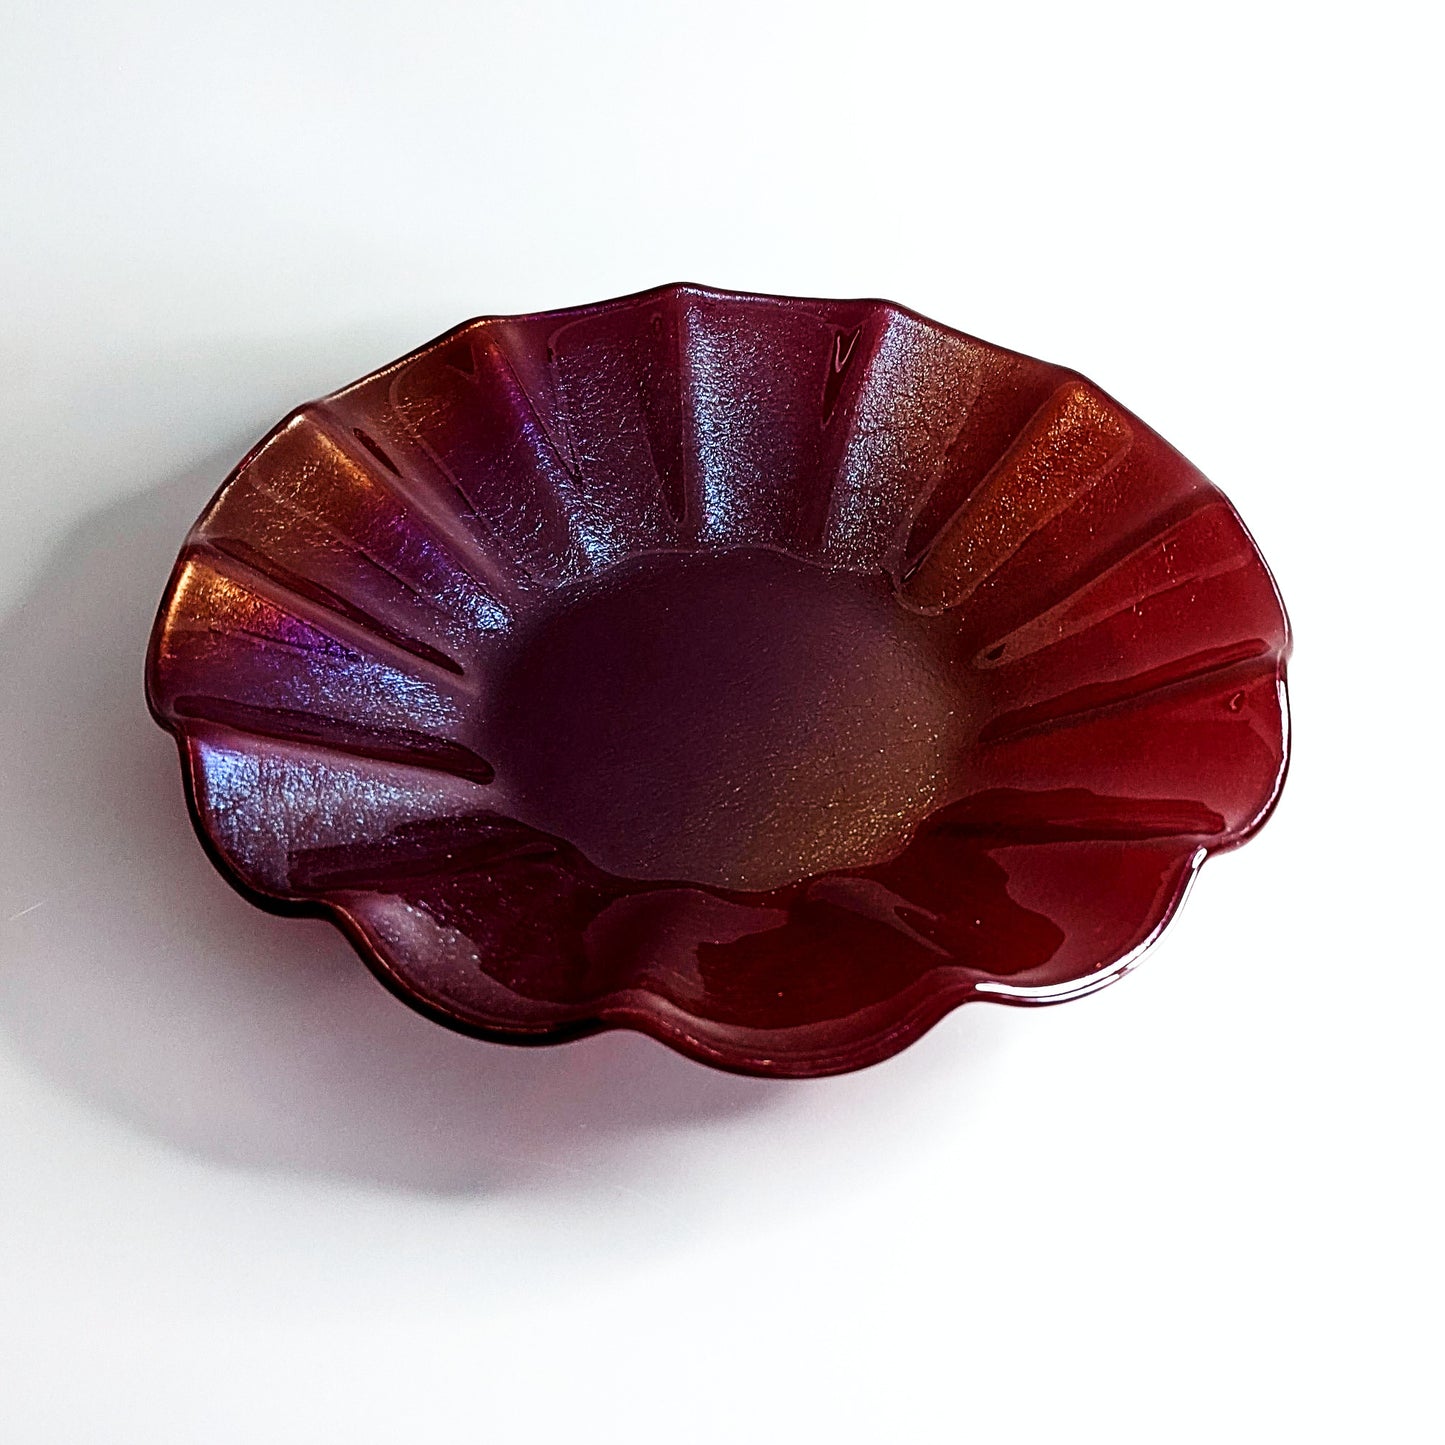 Ruby Red Iridescent Glass Art Fruit Bowl | Unique Home Décor Gifts